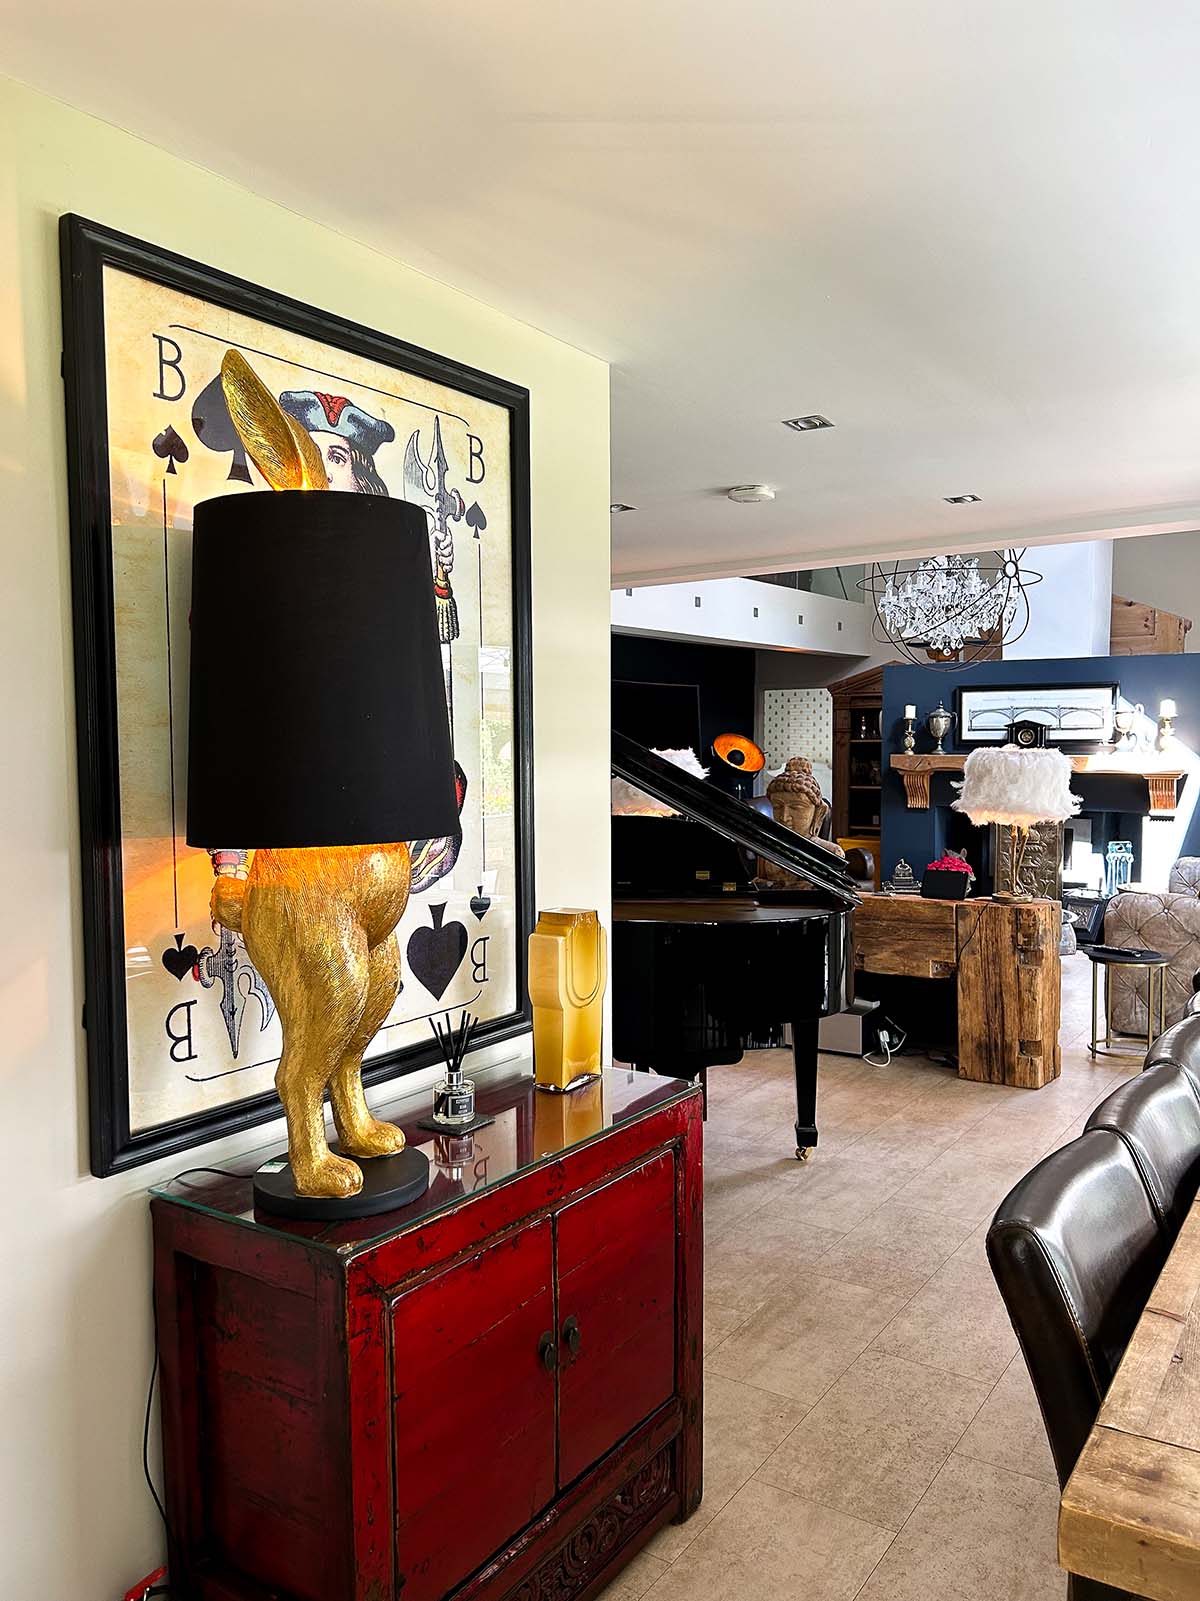 Scotland's Home of the Year episode 5. Image includes unique rabbit lamp, inspired by the mad hatter in Alice in Wonderland. Also pictured are leather dining chairs with solid wood dining table, grand piano, chandelier and grey couches.